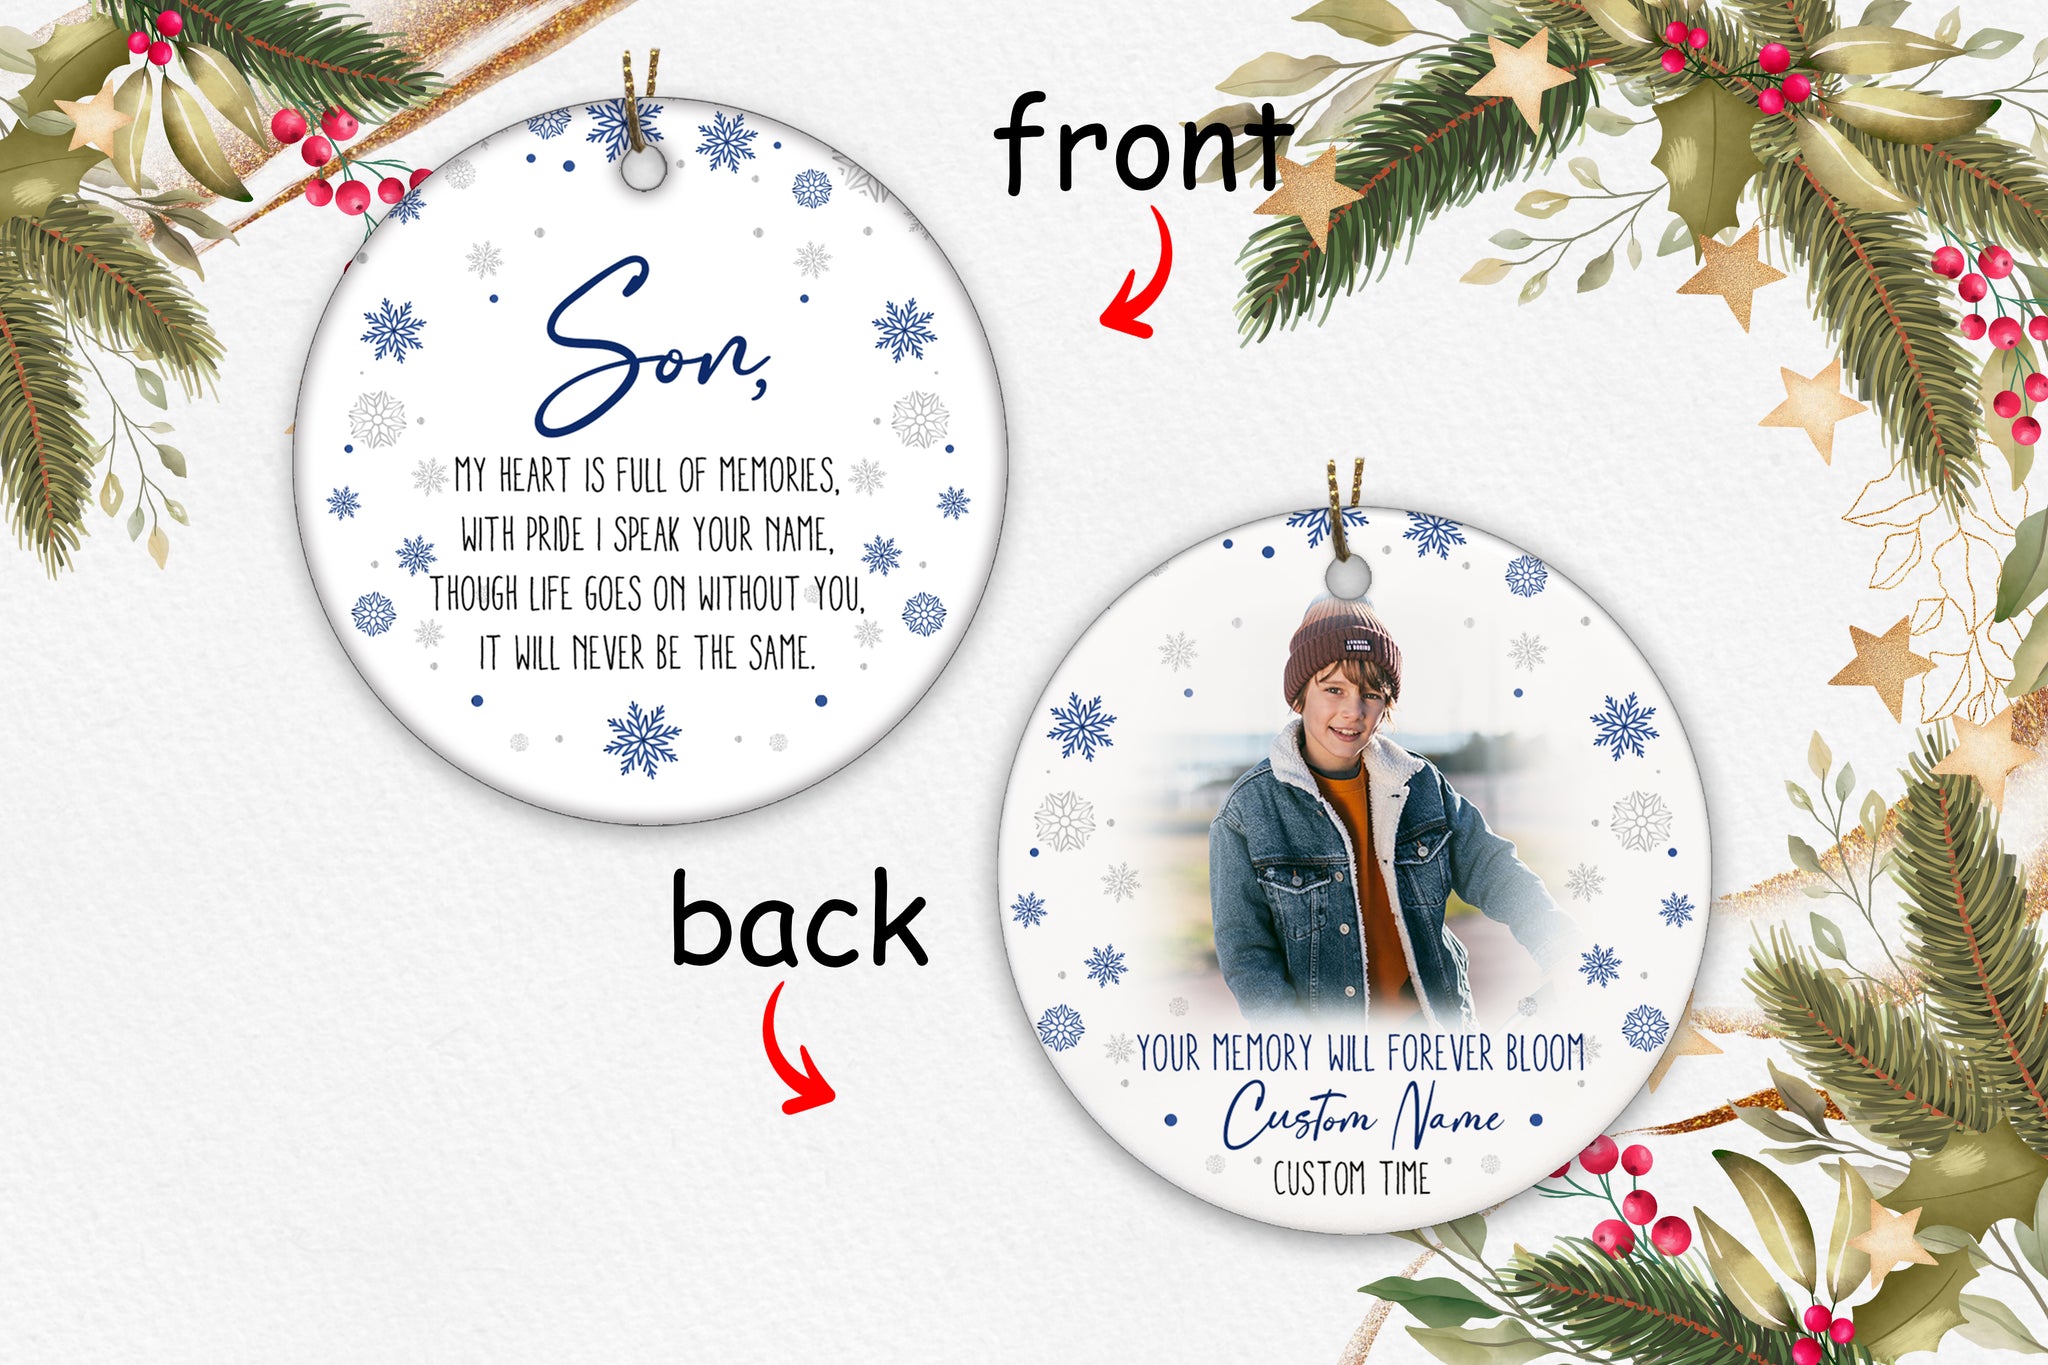 Son Remembrance Ornament - Personalized Circle Ornament 2 Sided Christmas Memorial Ornament Sympathy Gift for Dad Mom Passing Son Son Remembrance Gift Son Sympathy Gift - JOR88